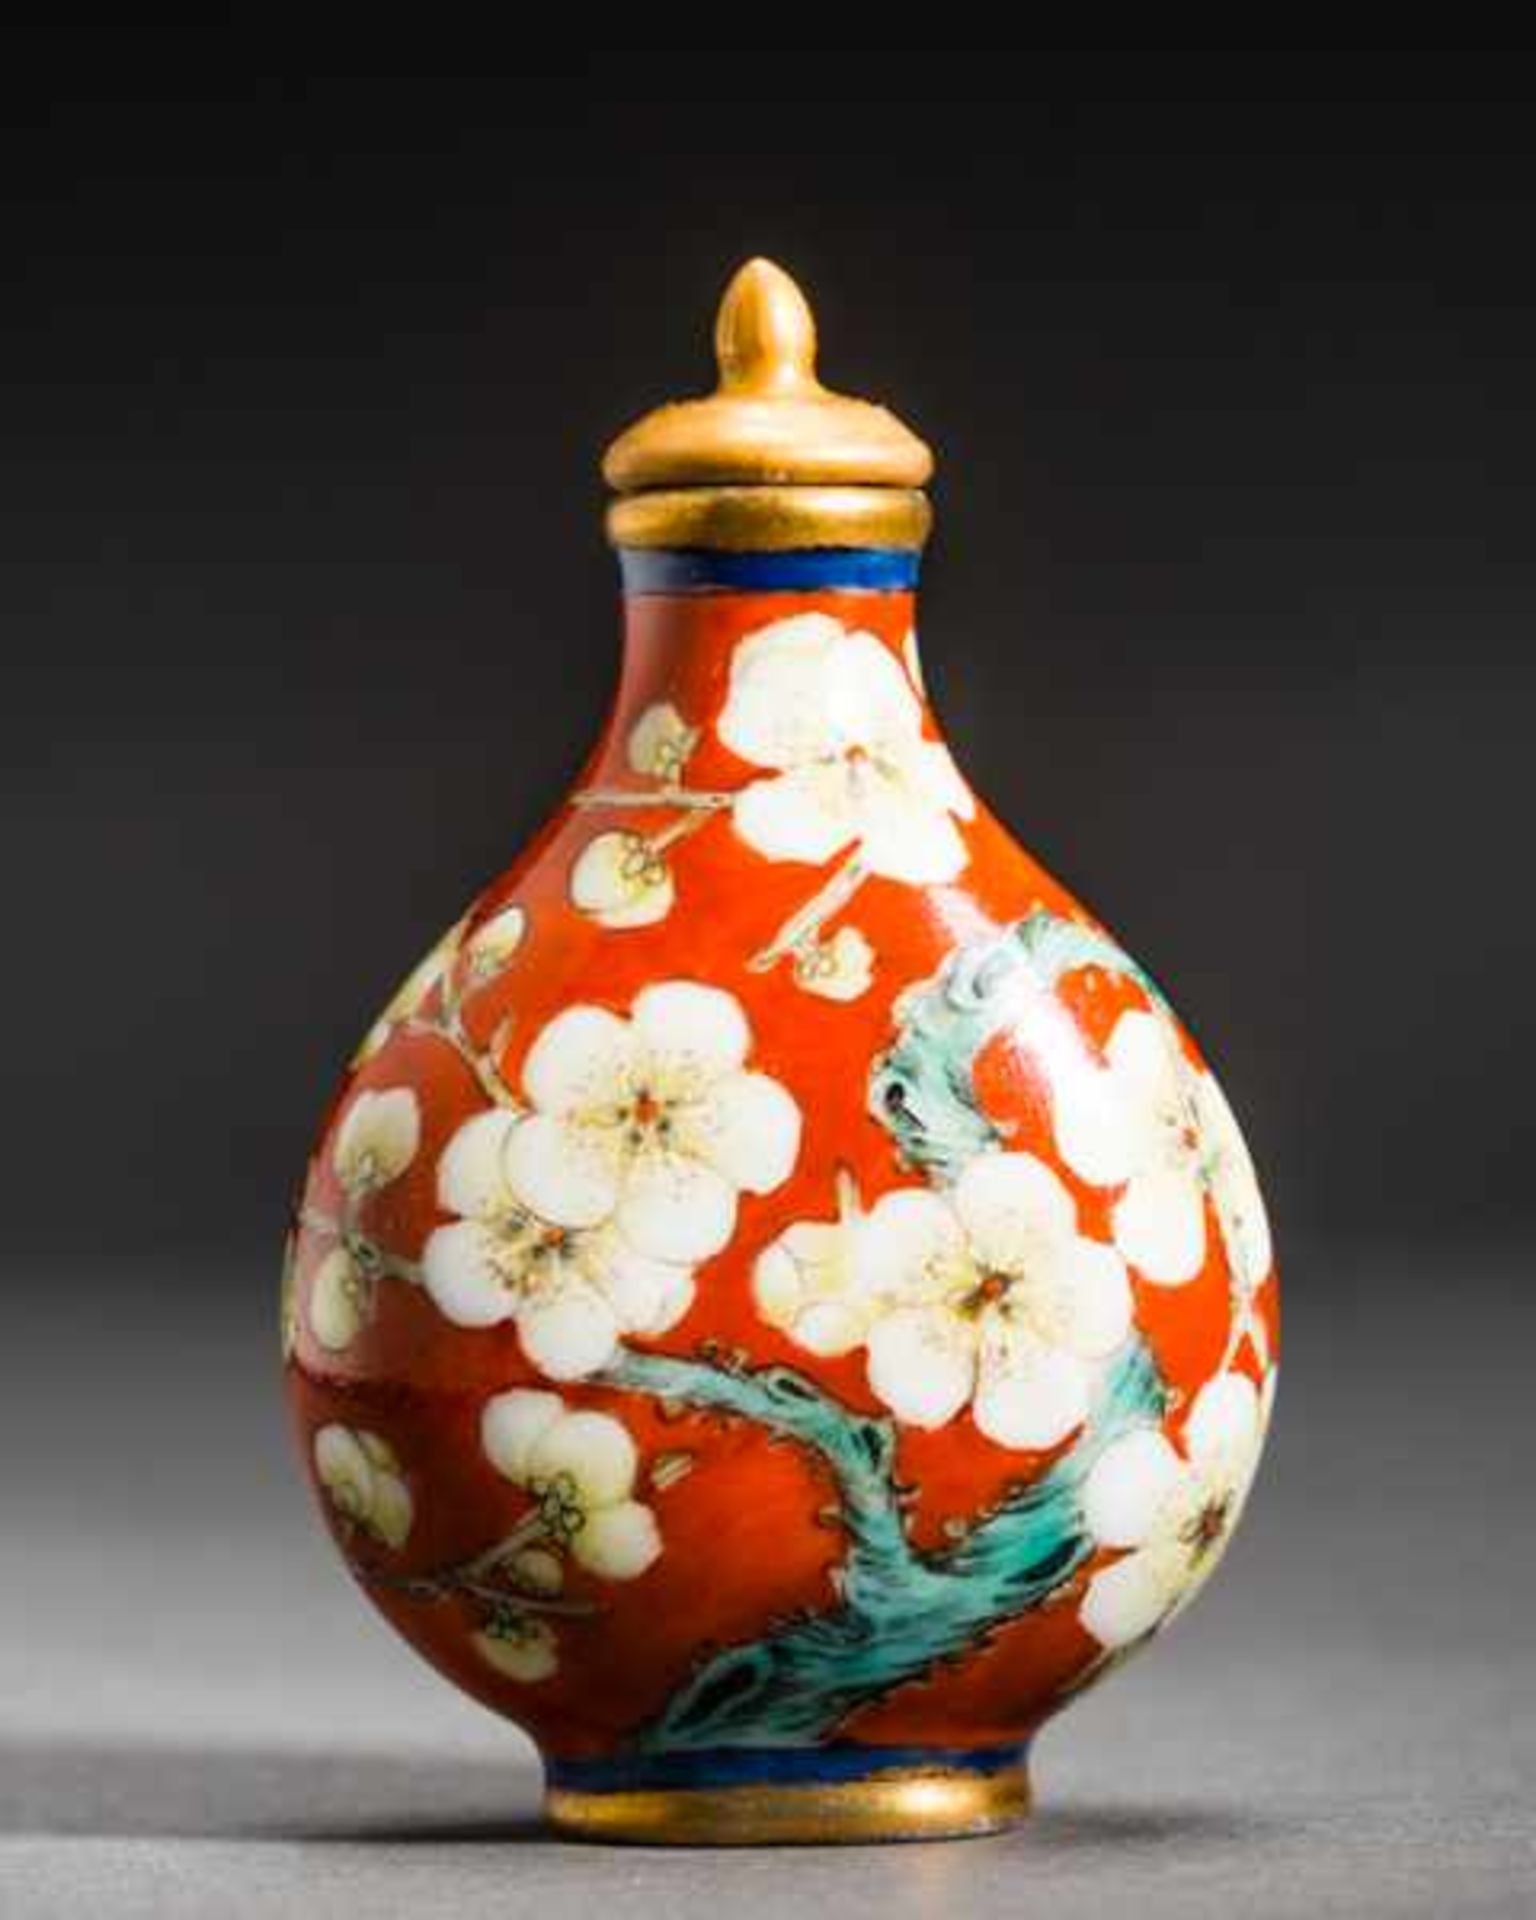 BLOSSOMING PLUM TREE Porcelain with enamel paint. Stopper: gilded porcelain, ivory spoon. China, - Image 2 of 6